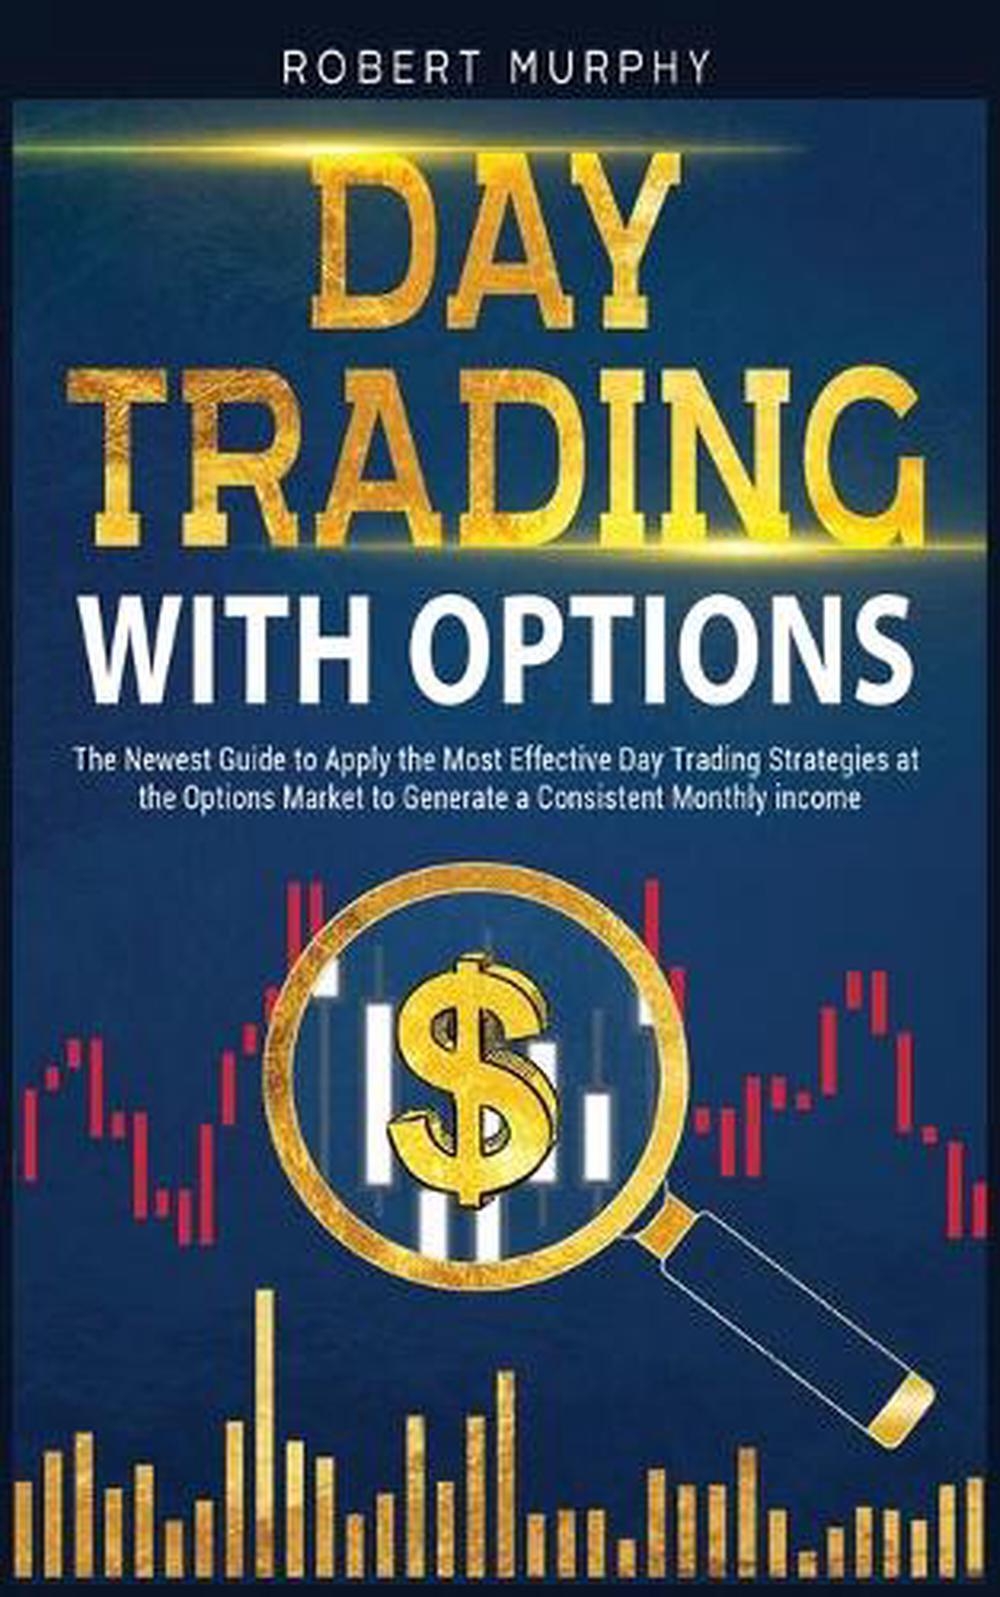 Day Trading With Options by Robert Murphy (English) Paperback Book Free